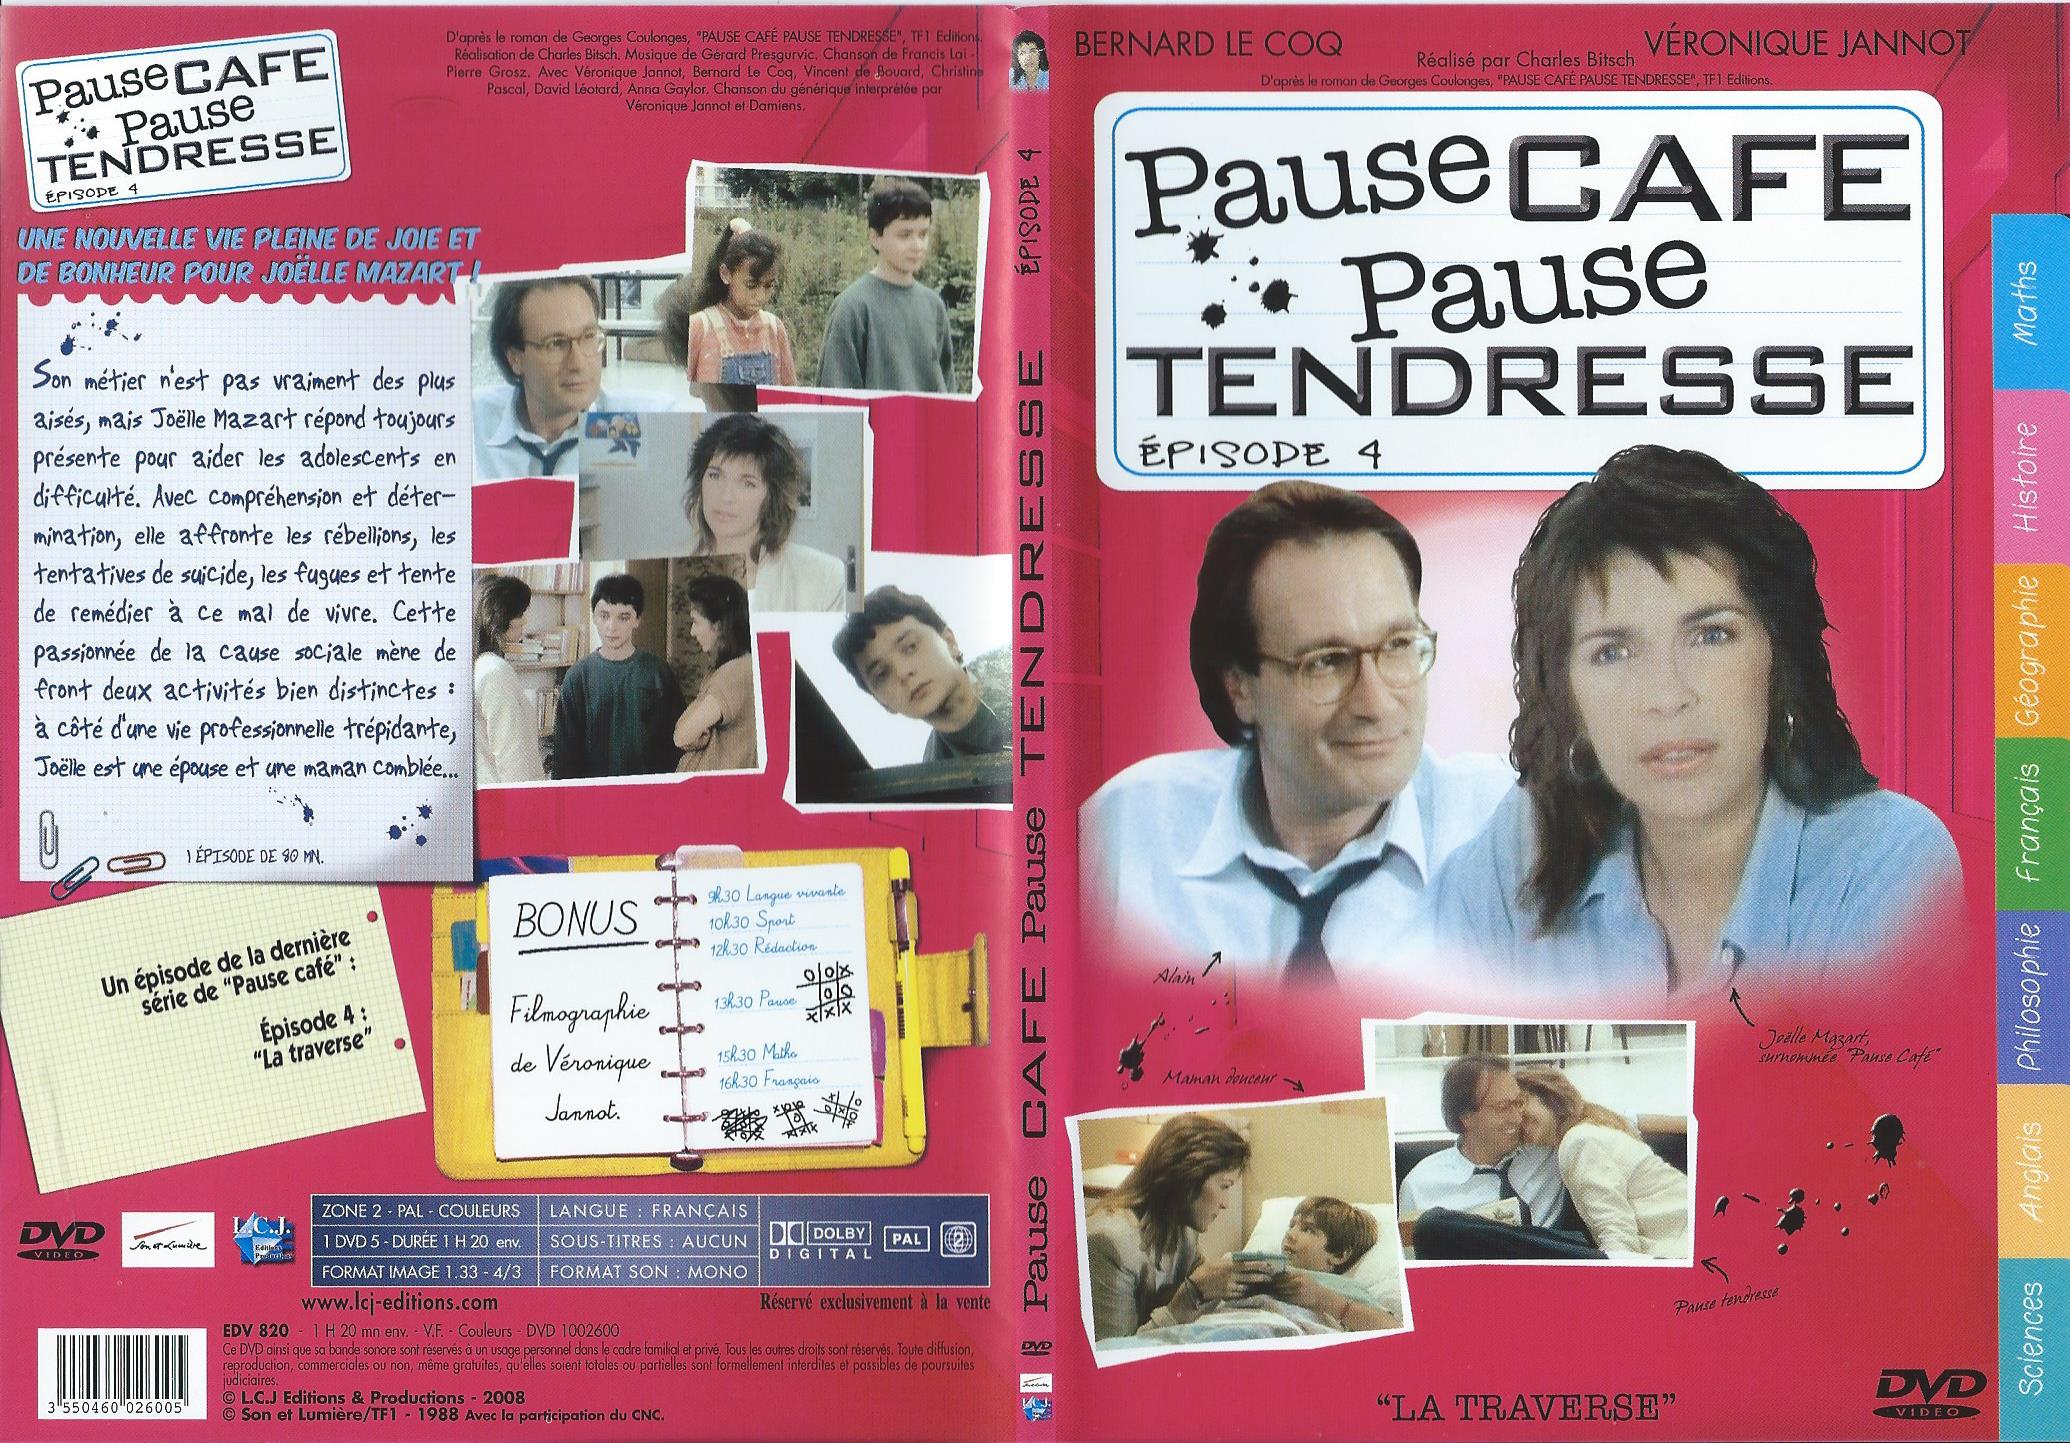 Jaquette DVD Pause Caf, Pause Tendresse DVD 4